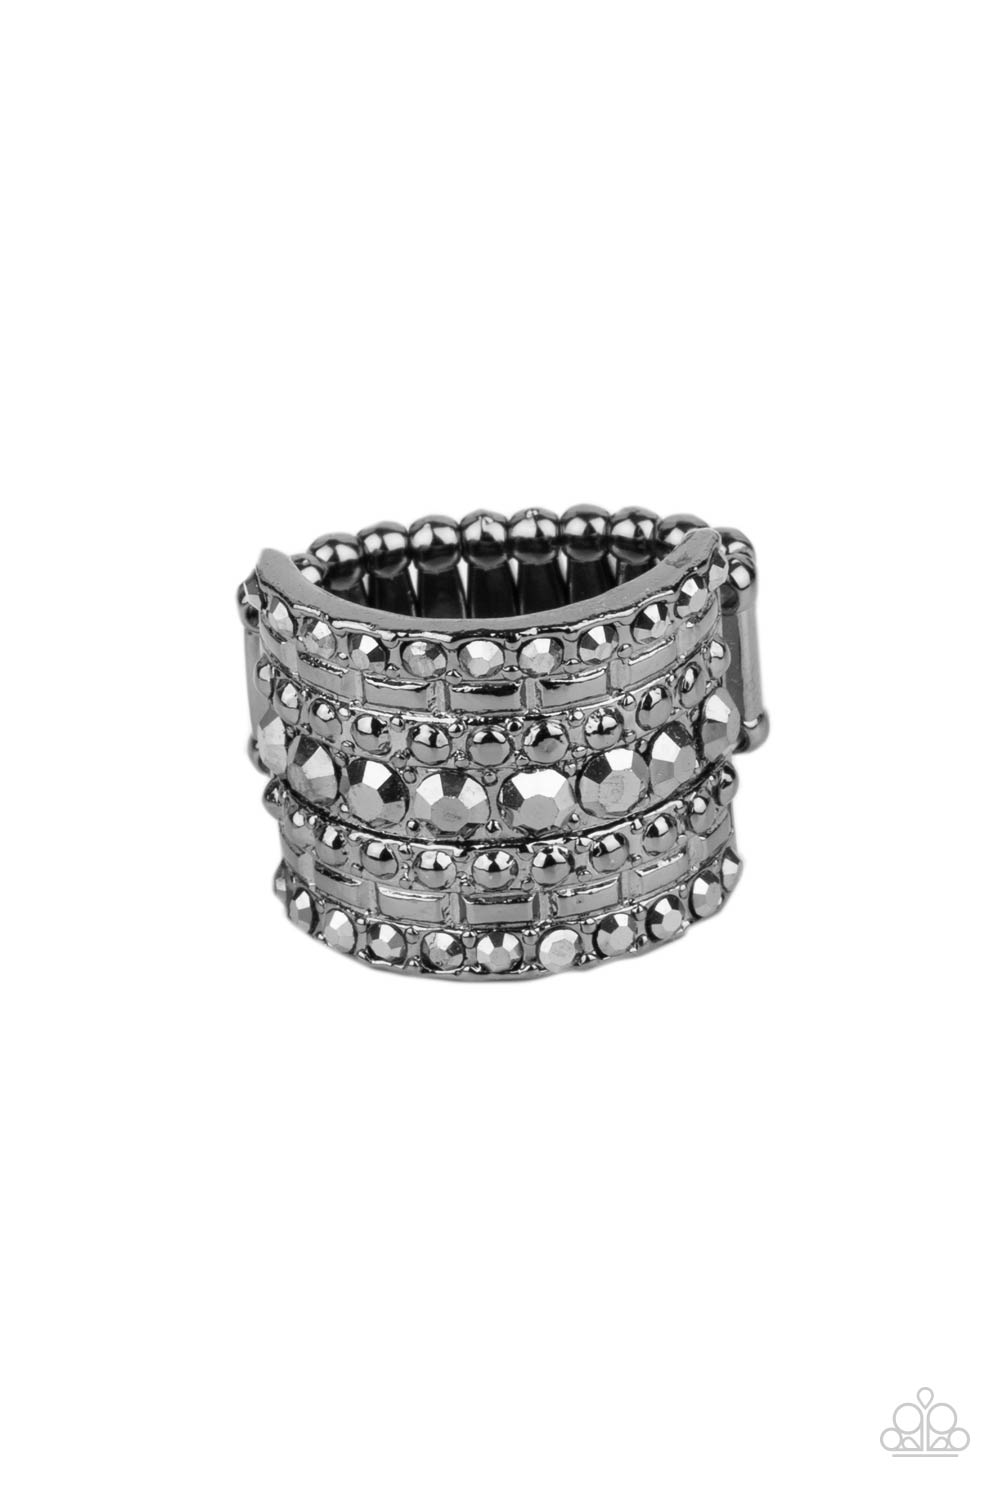 Layers of linear gunmetal textures are accented with a single row of hematite rhinestones